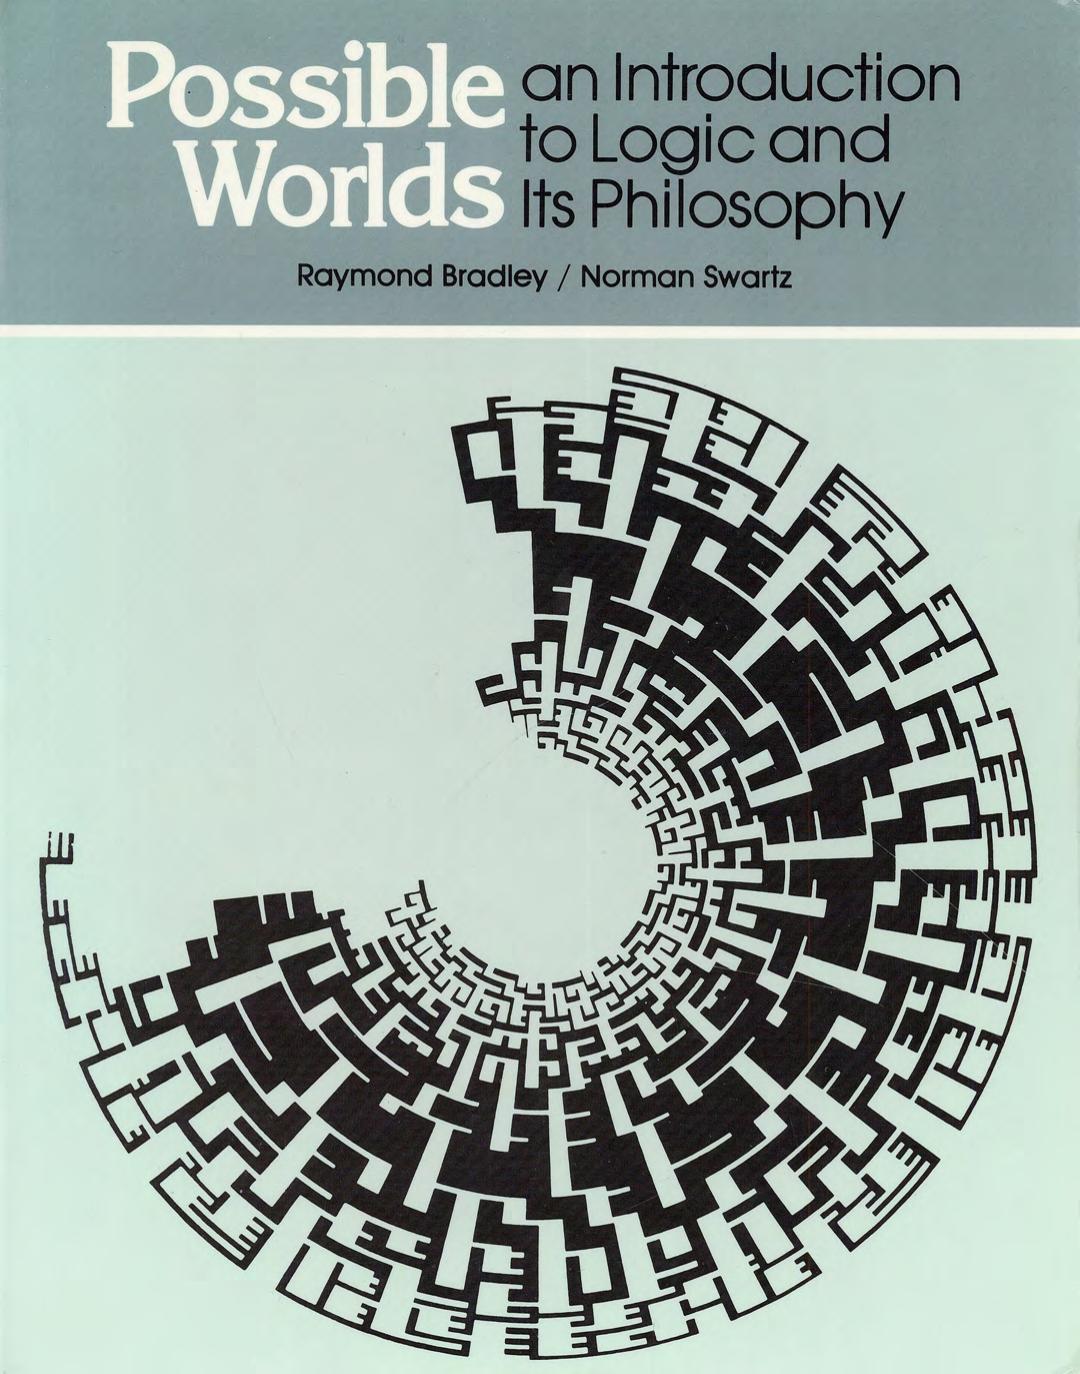 Possible Worlds: An Introduction to Logic and Its Philosophy